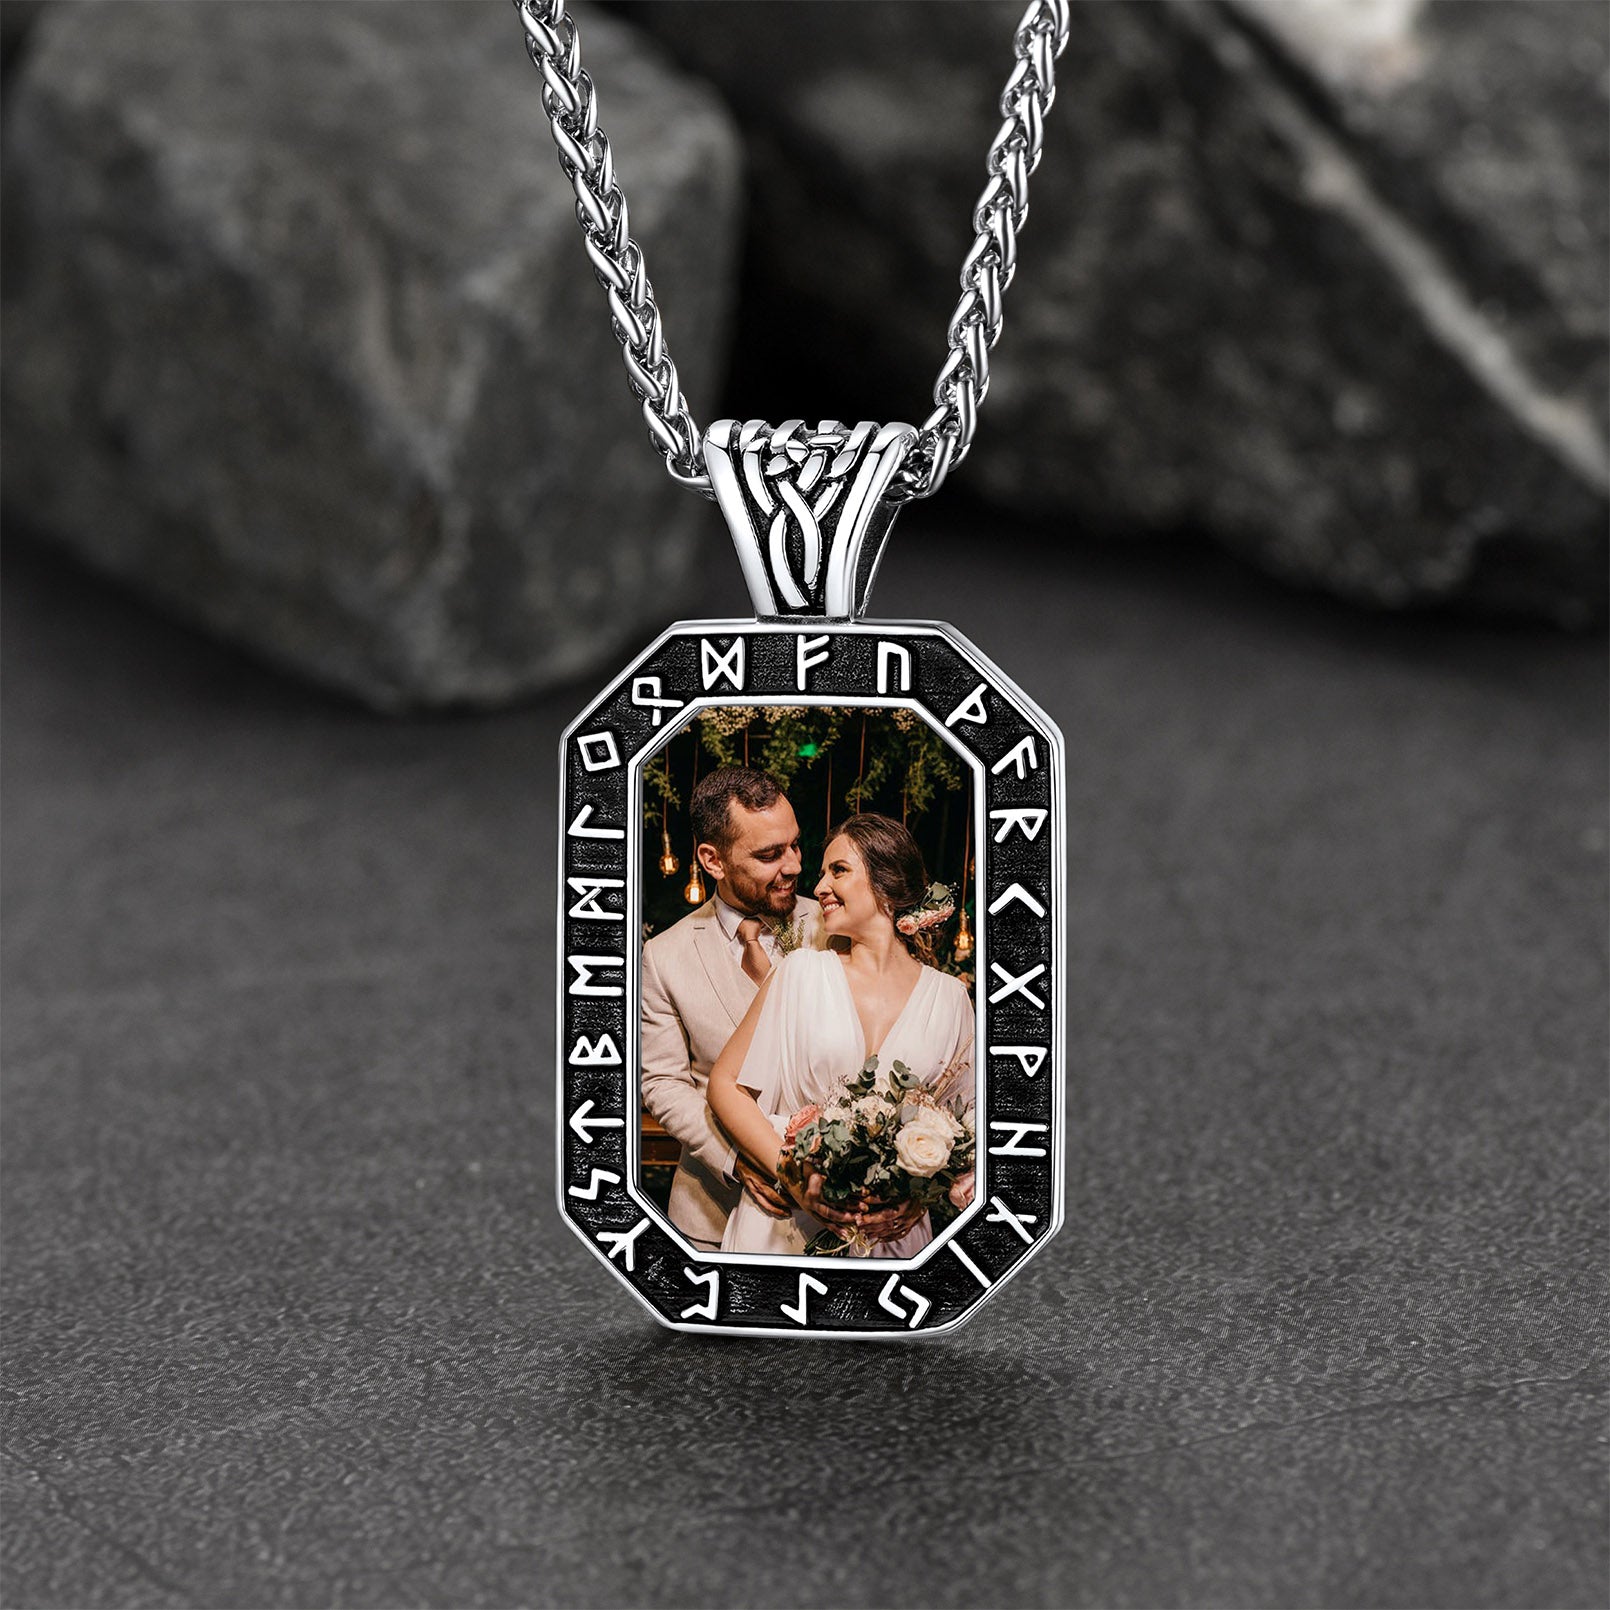 Engraved Custom Photo Dog Tags Necklace with Runes for Men FaithHeart